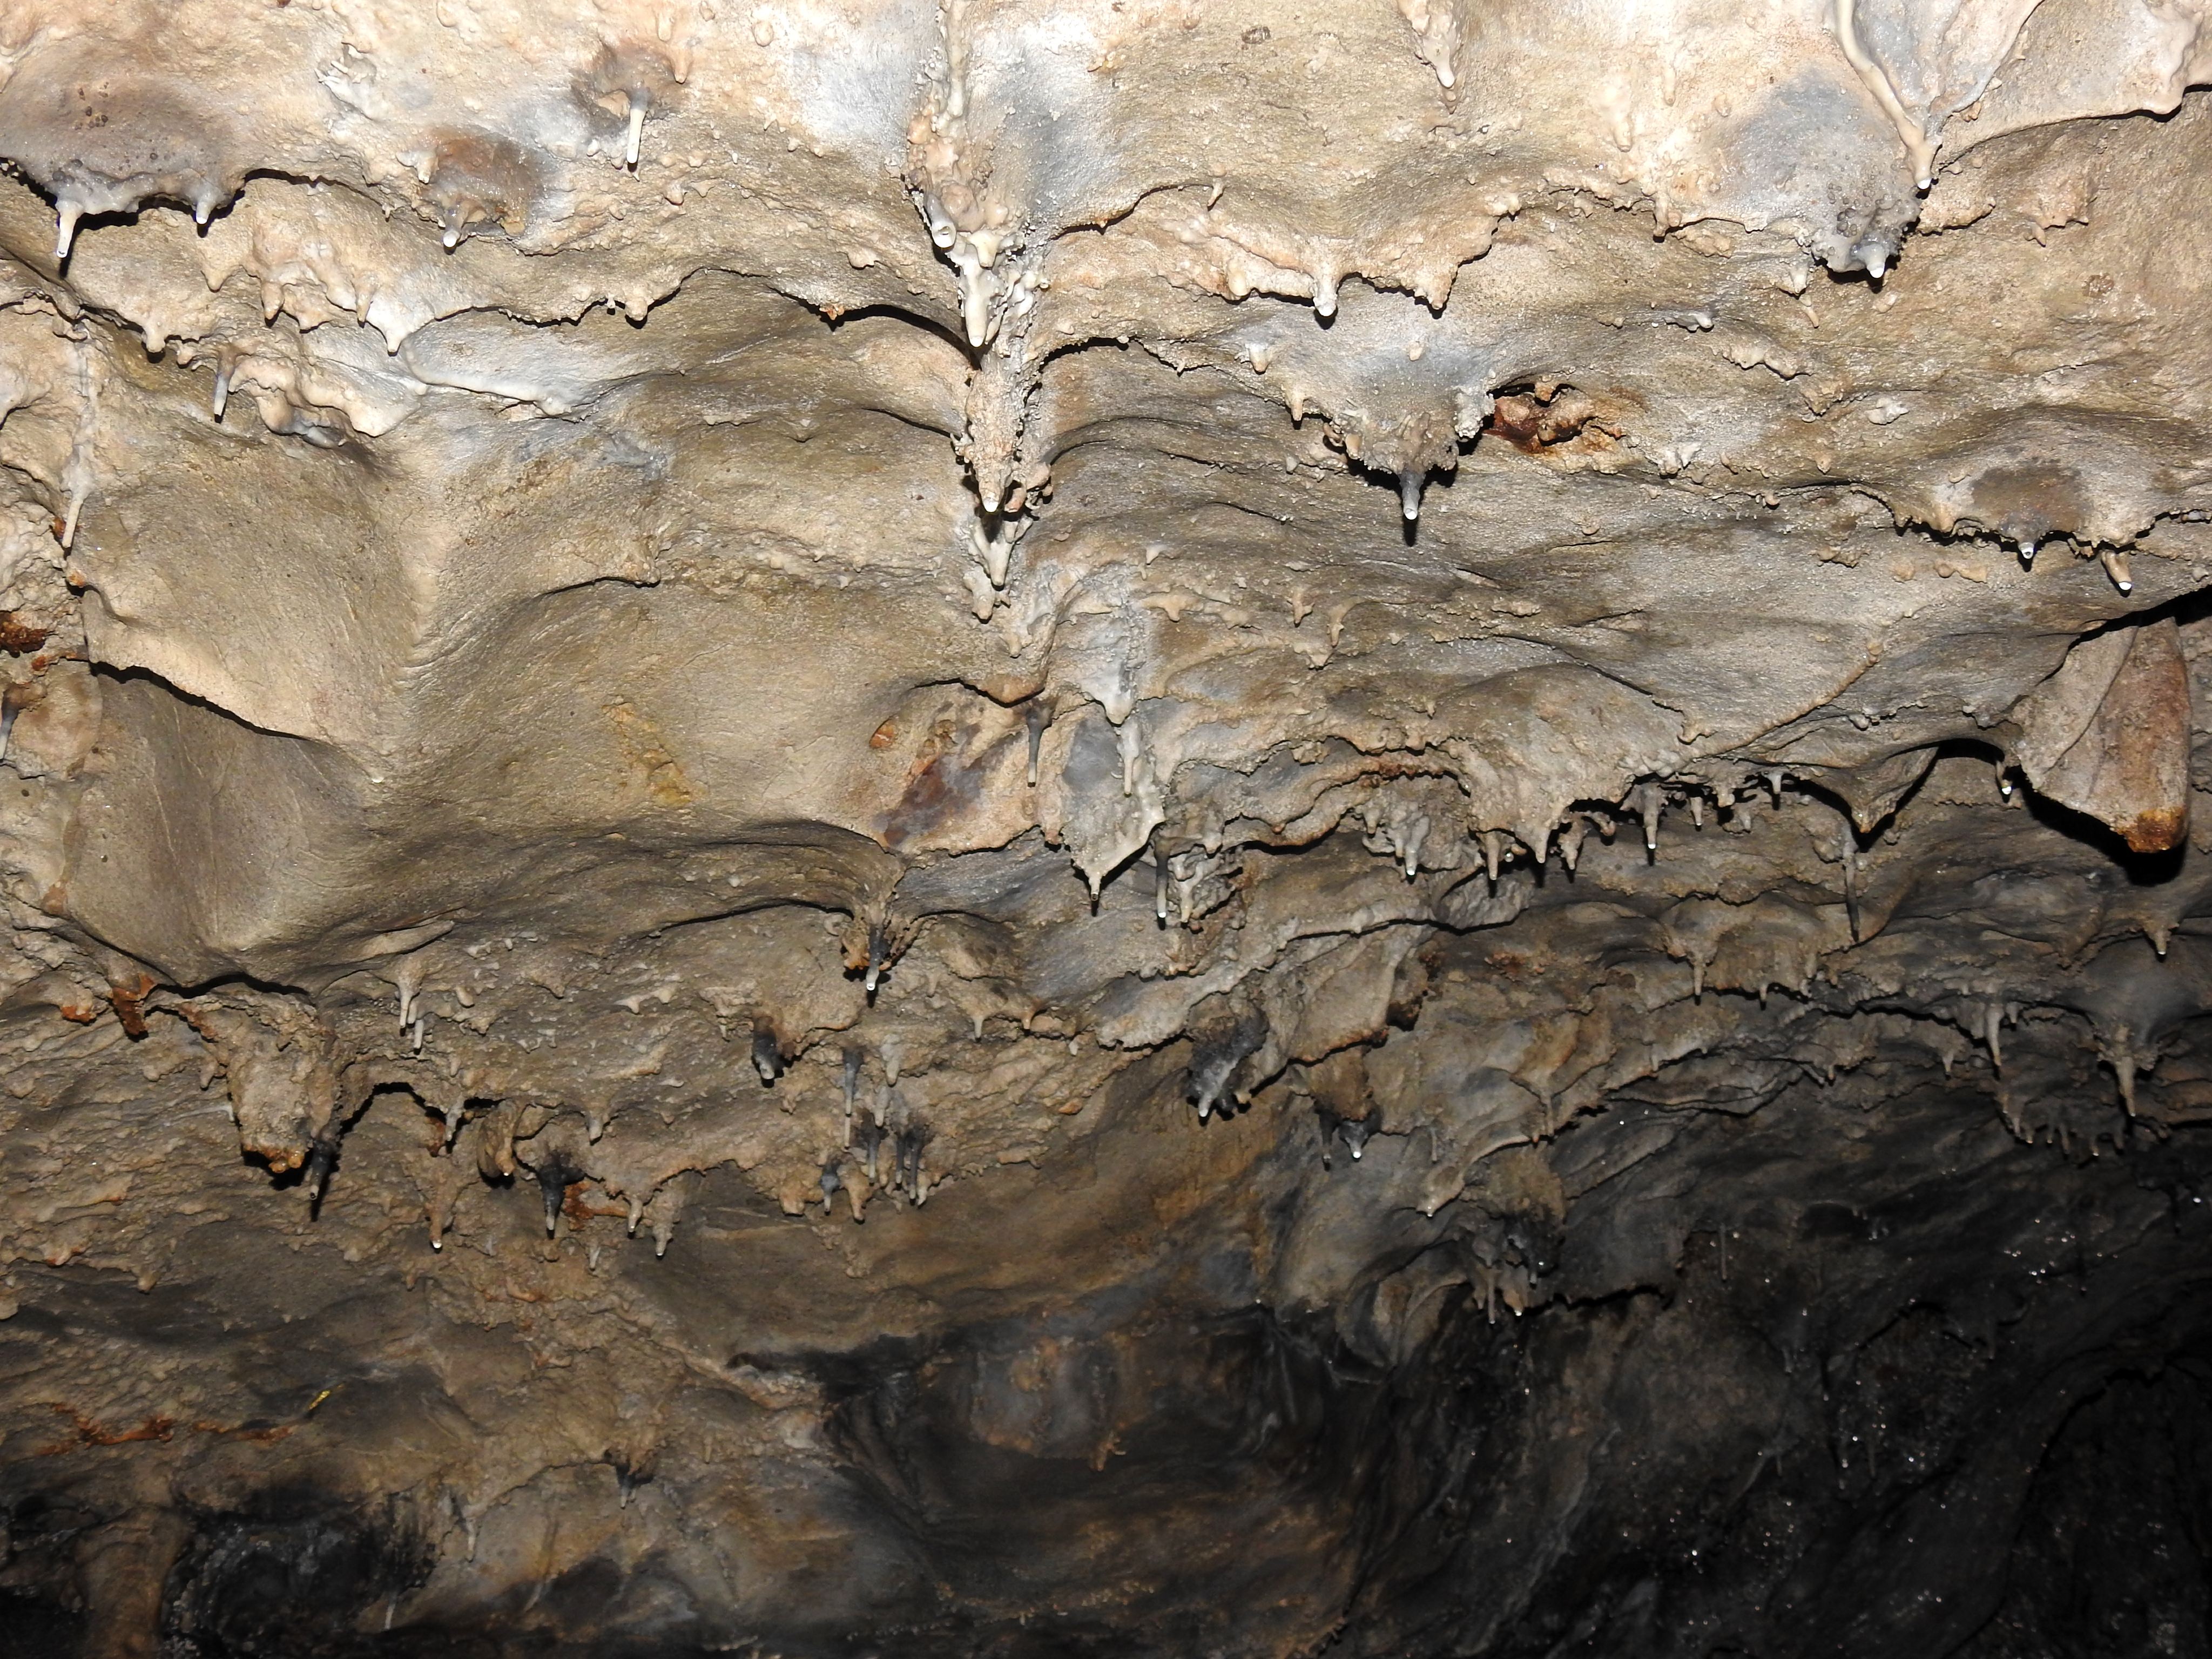 Speleothems inside the cave